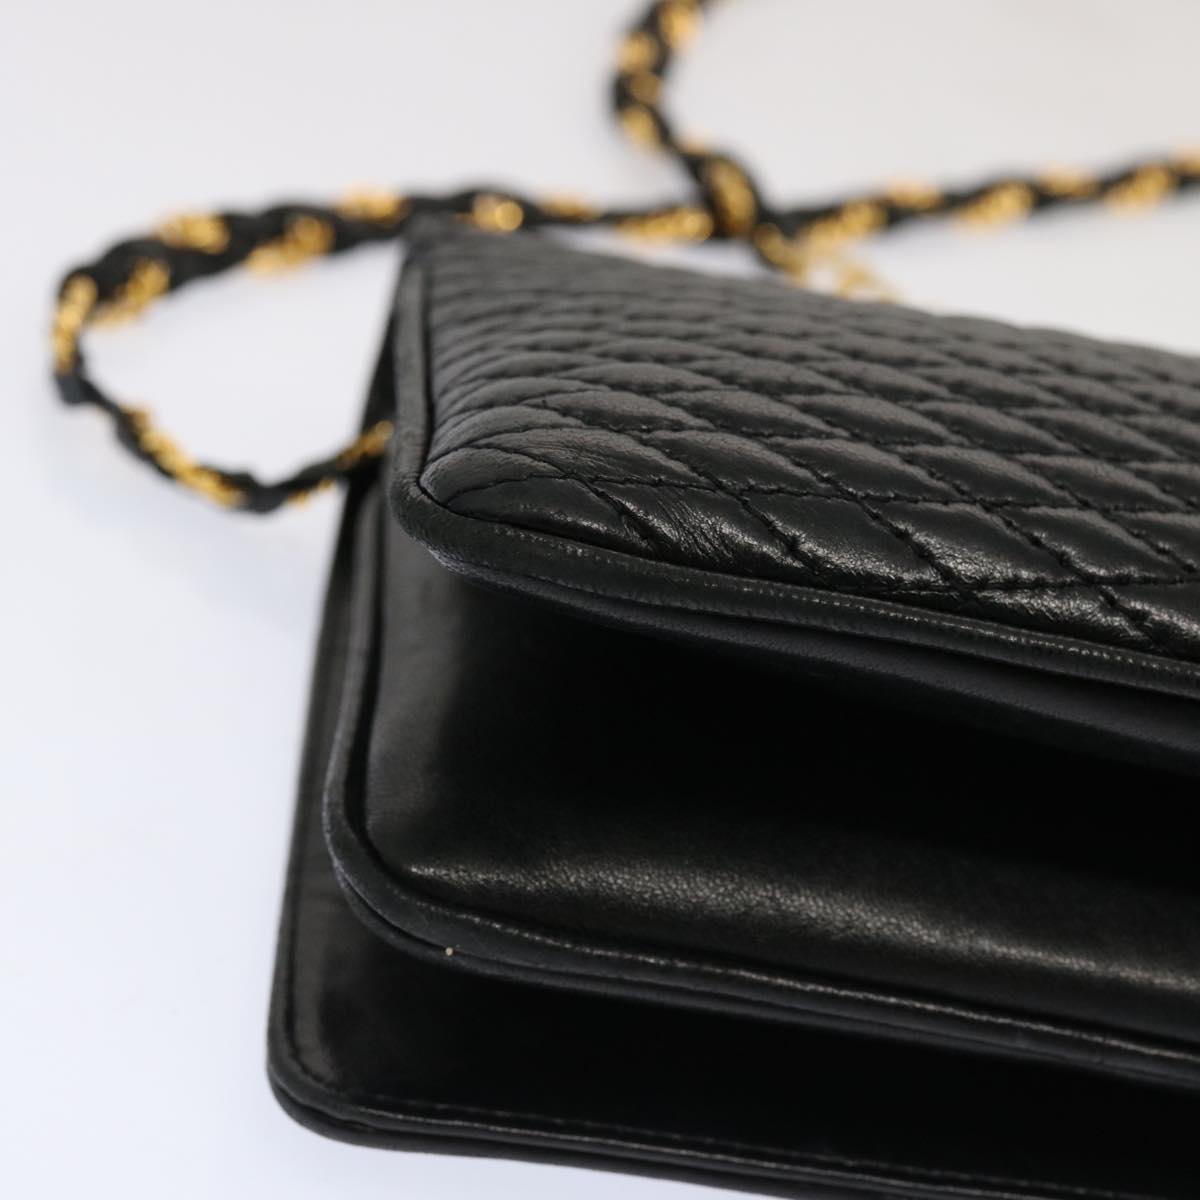 BALLY Quilted Chain Shoulder Bag Leather Black Auth am5980